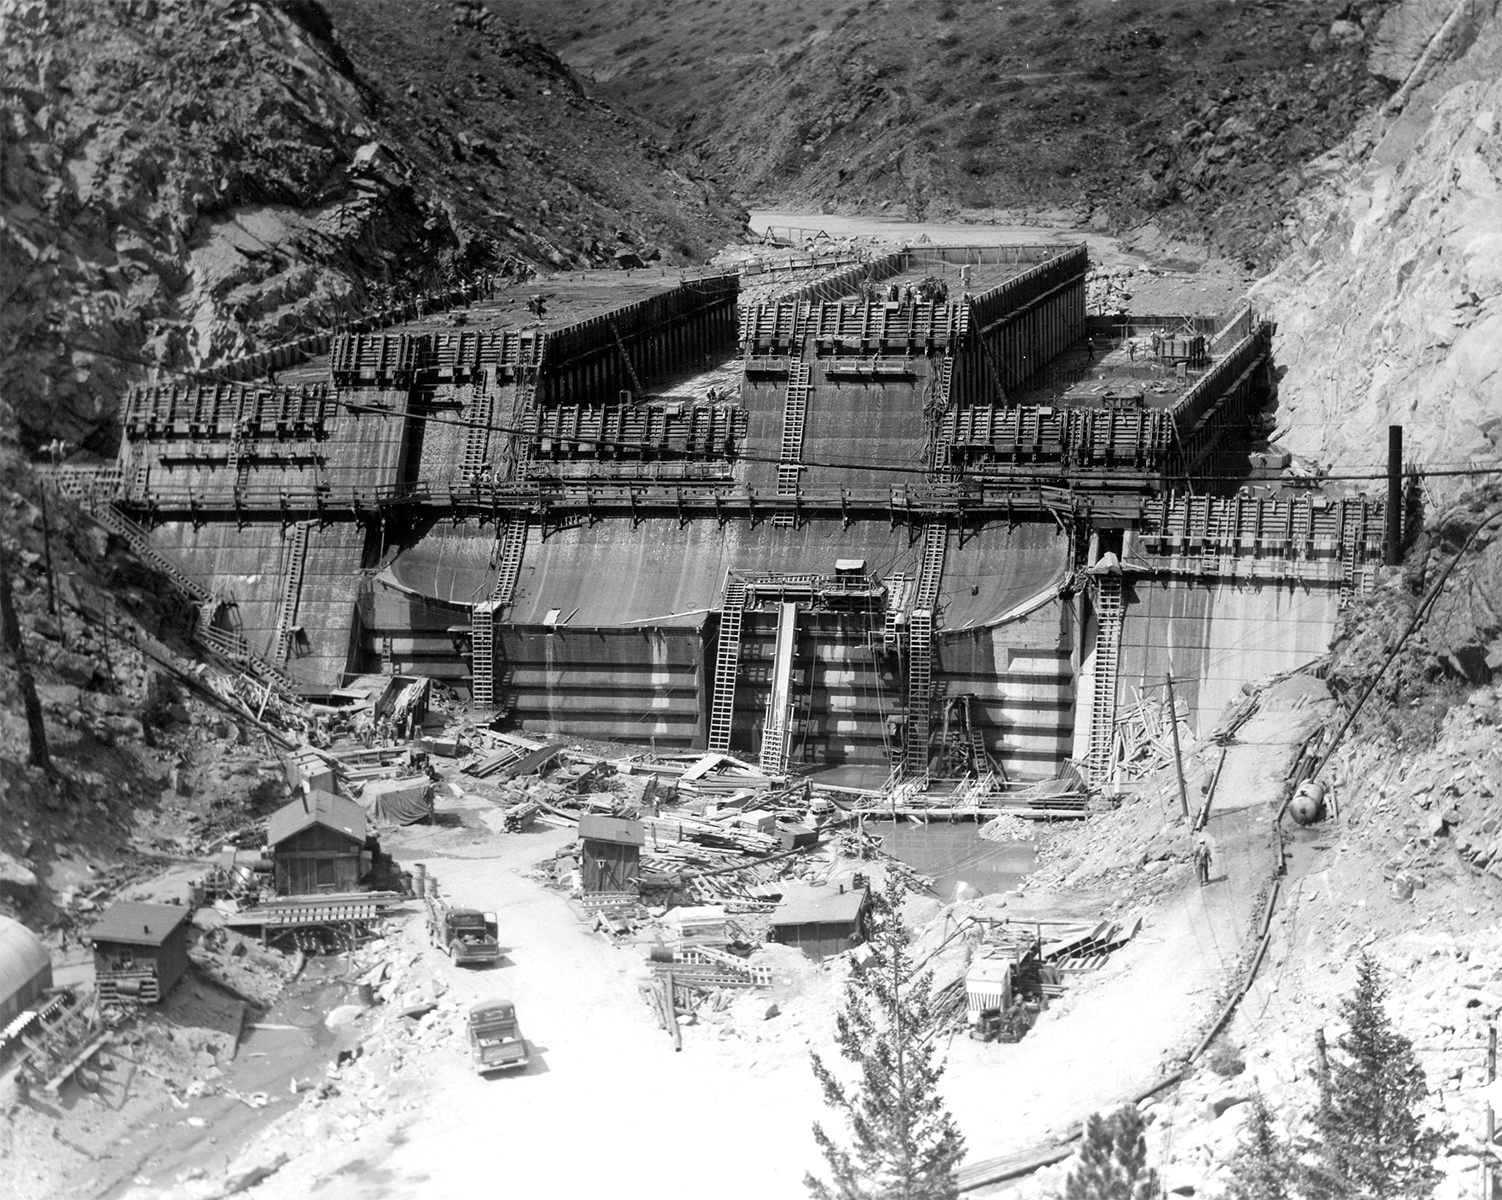 This is a photo from the 1950s showing Gross Dam under construction.